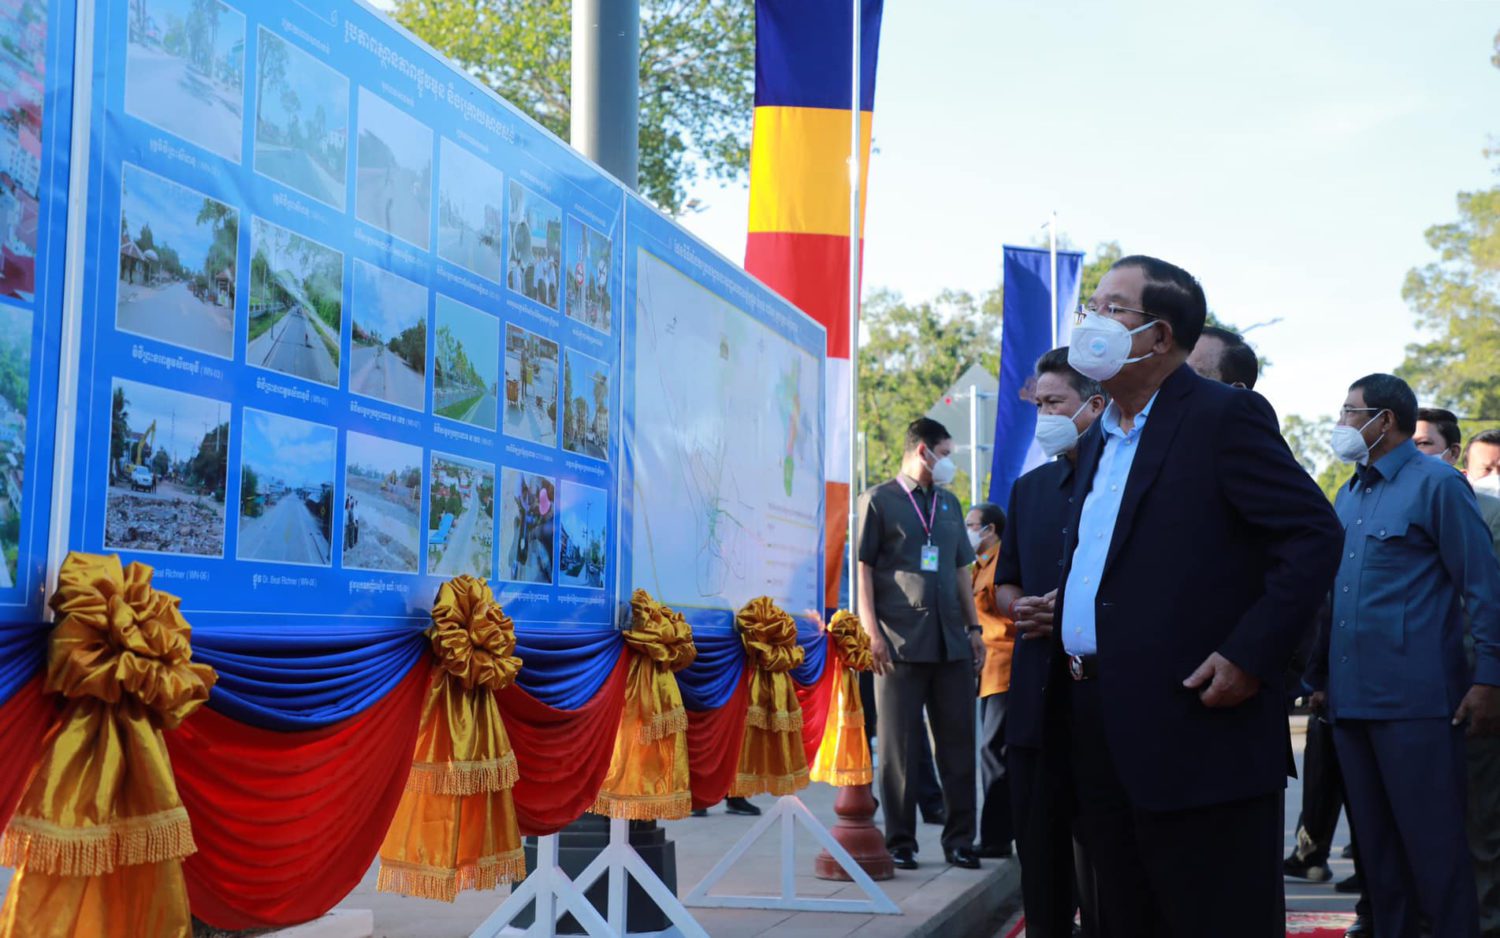 Prime Minister Hun Sen views an infrastructure project poster in Siem Reap province during a speech on April 4, 2022. (Hun Sen's Facebook page)